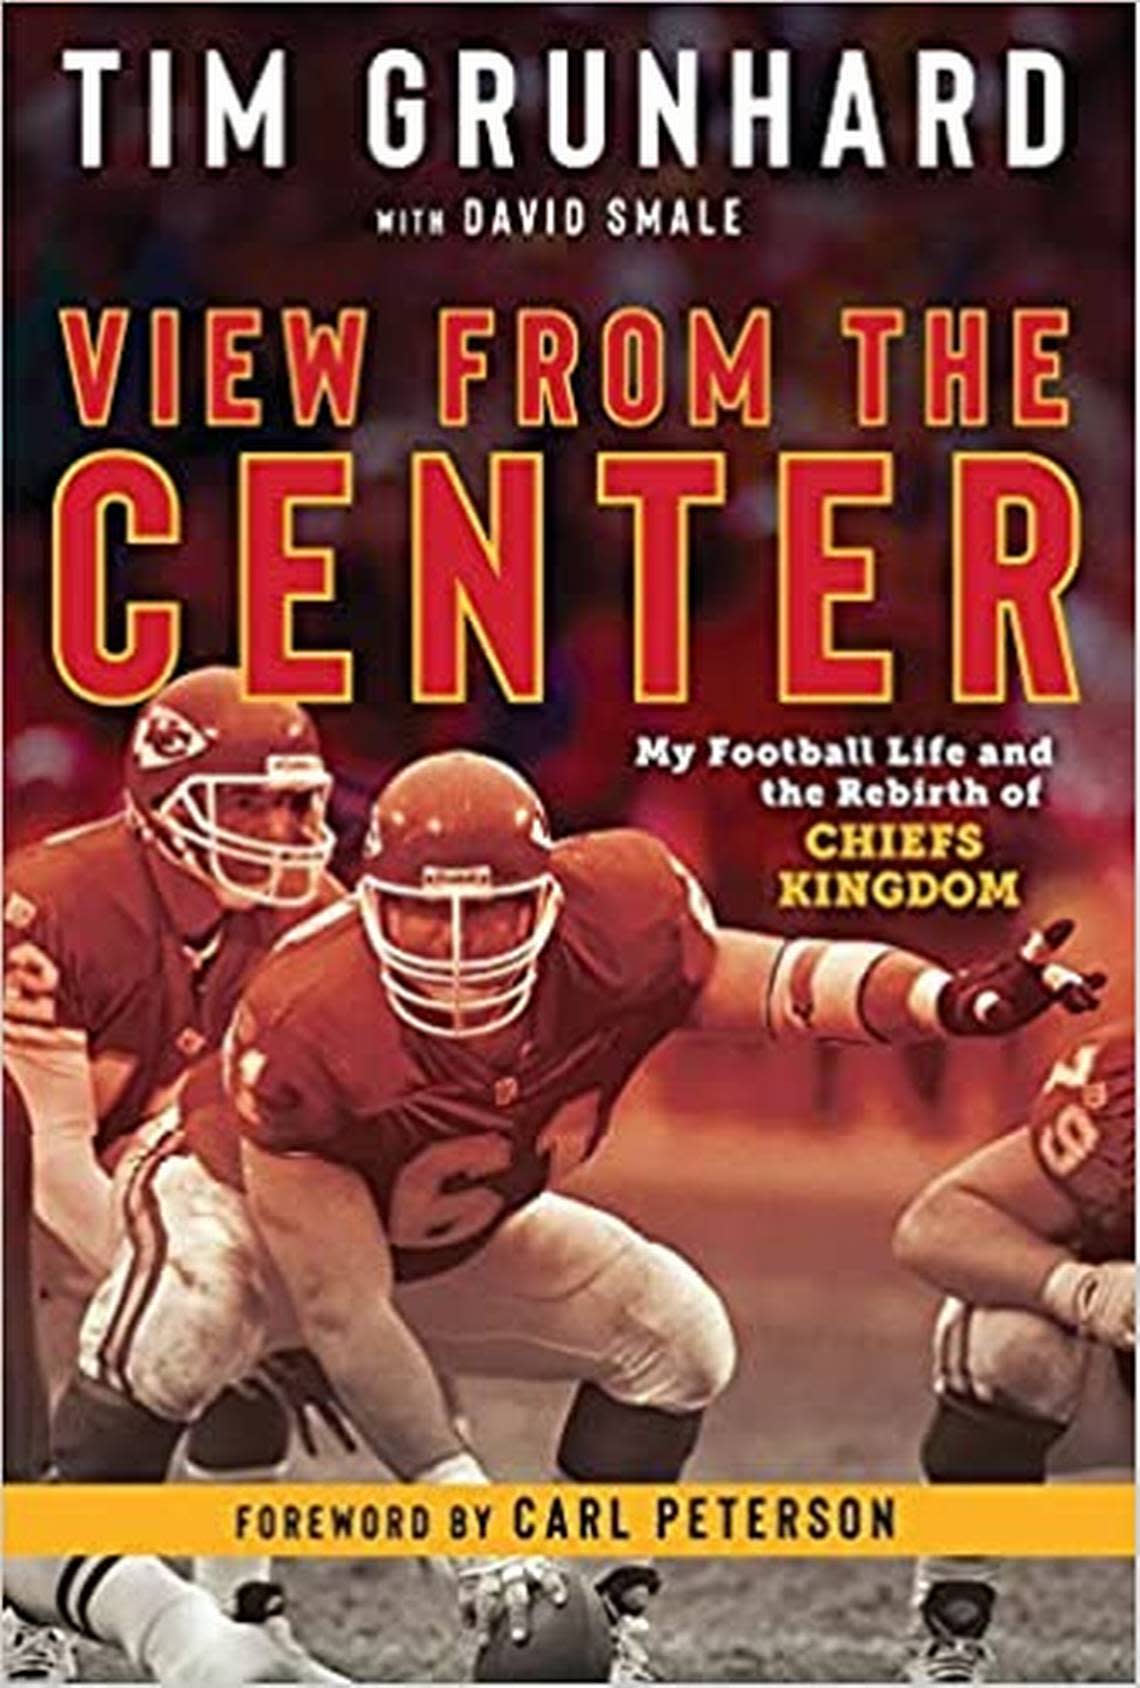 “View From the Center: My Football Life and the Rebirth of Chiefs Kingdom”